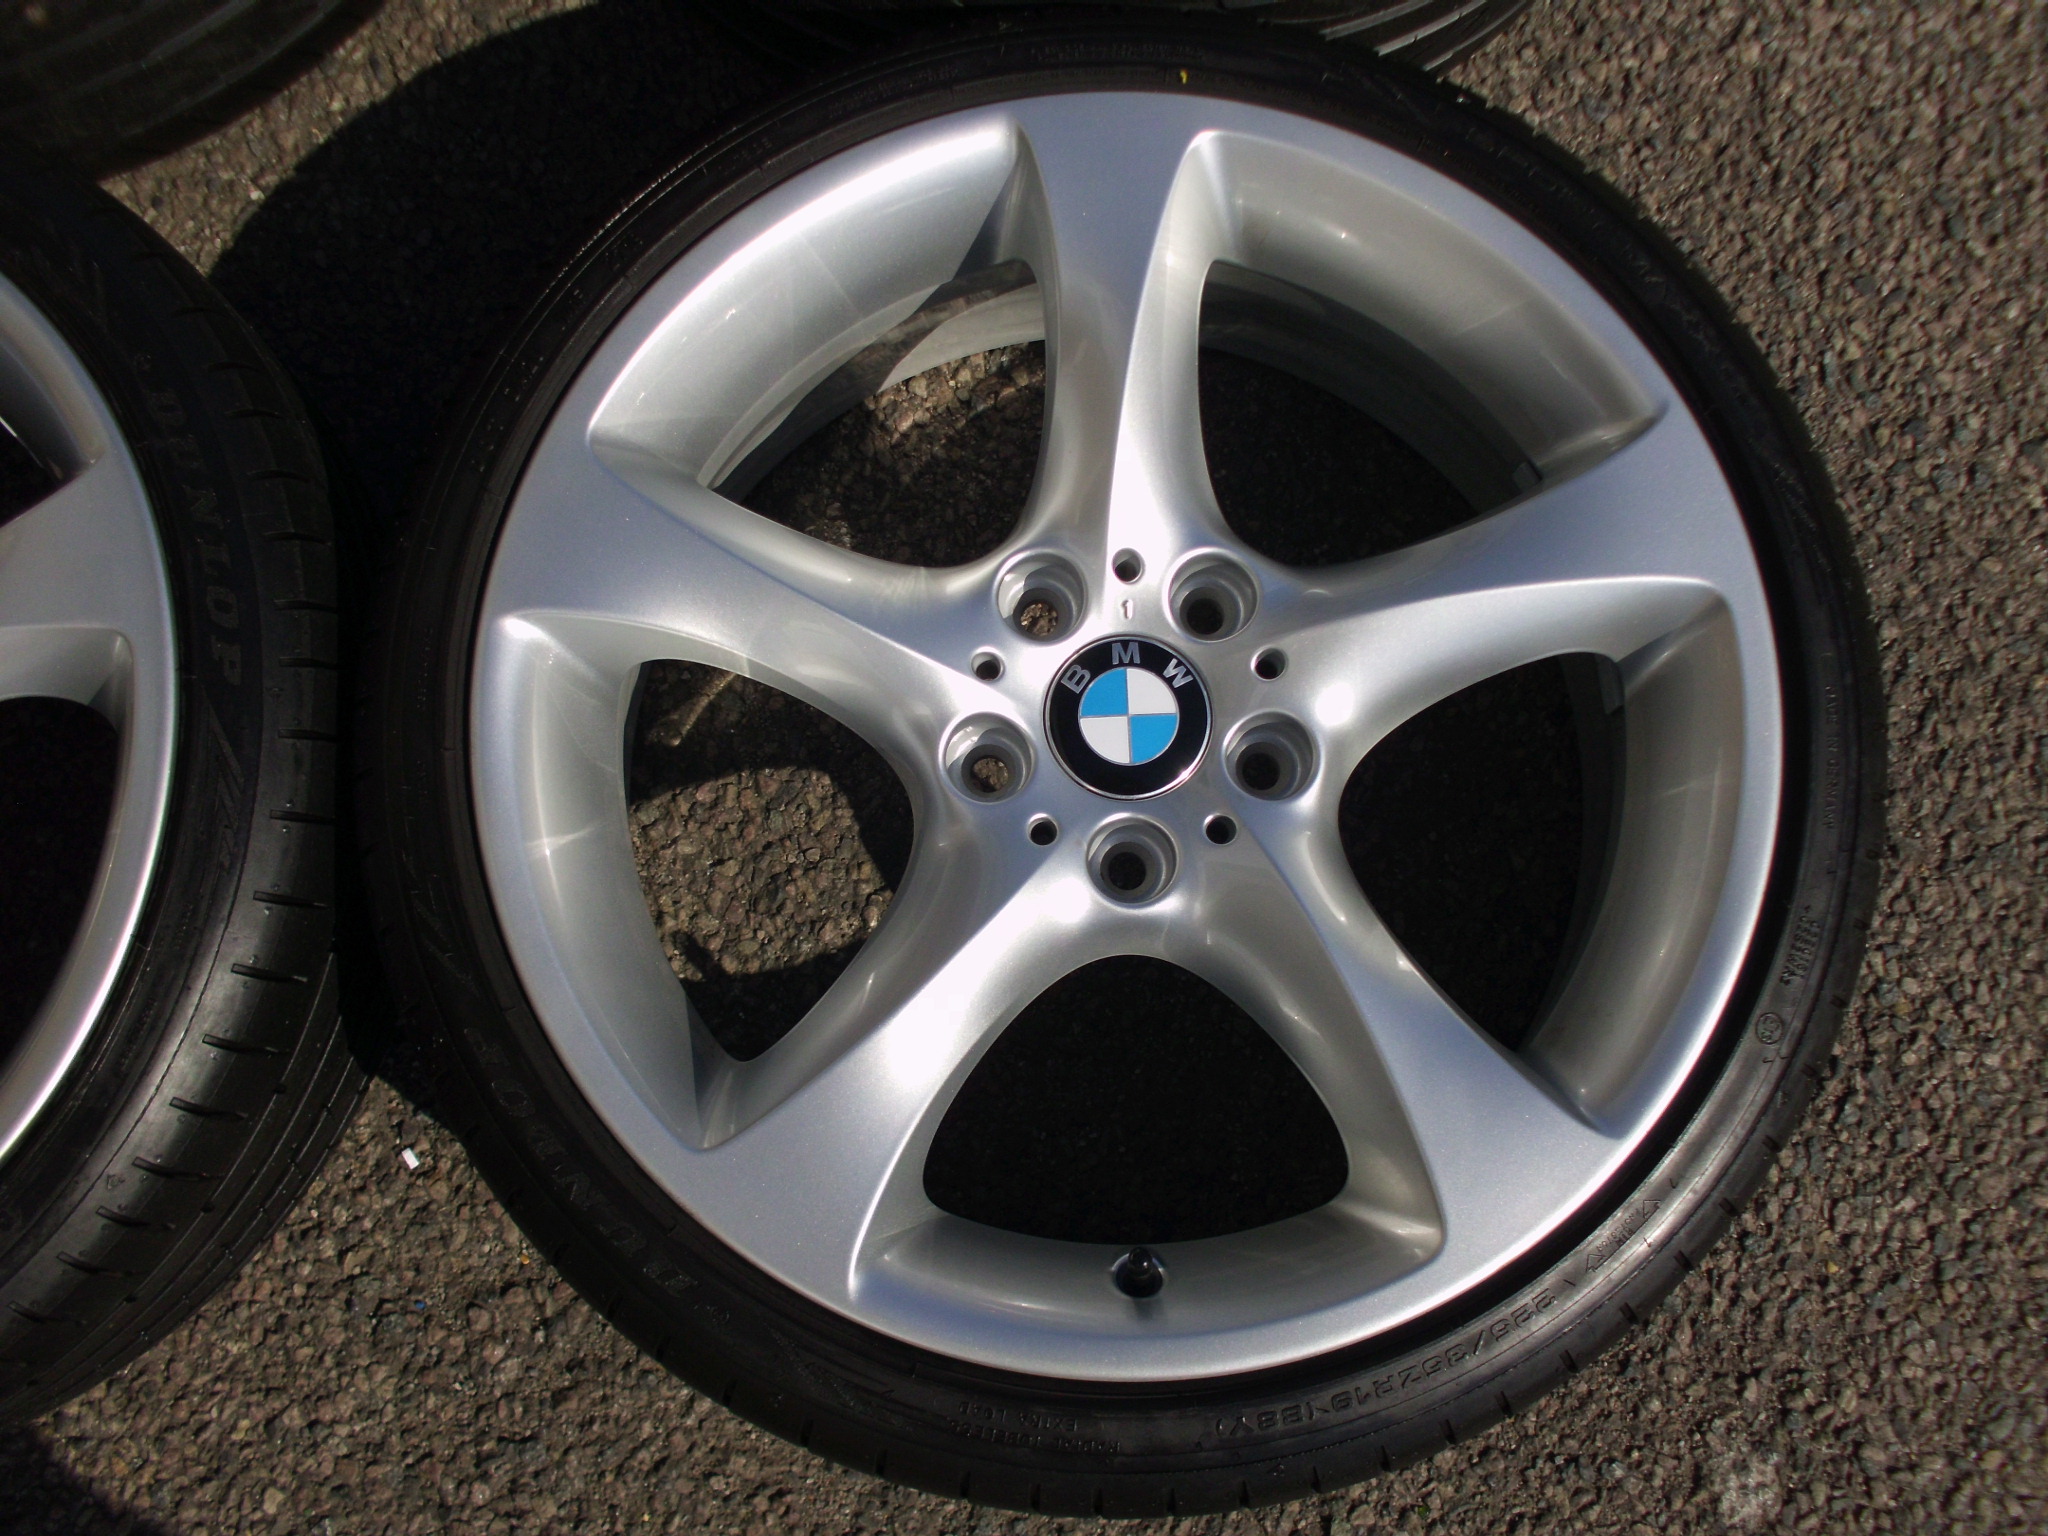 USED 19" GENUINE BMW STYLE 230 TWIST E92 ALLOY WHEELS, FULLY REFURBED,WIDE REAR INC VG NON RUNFLAT TYRES